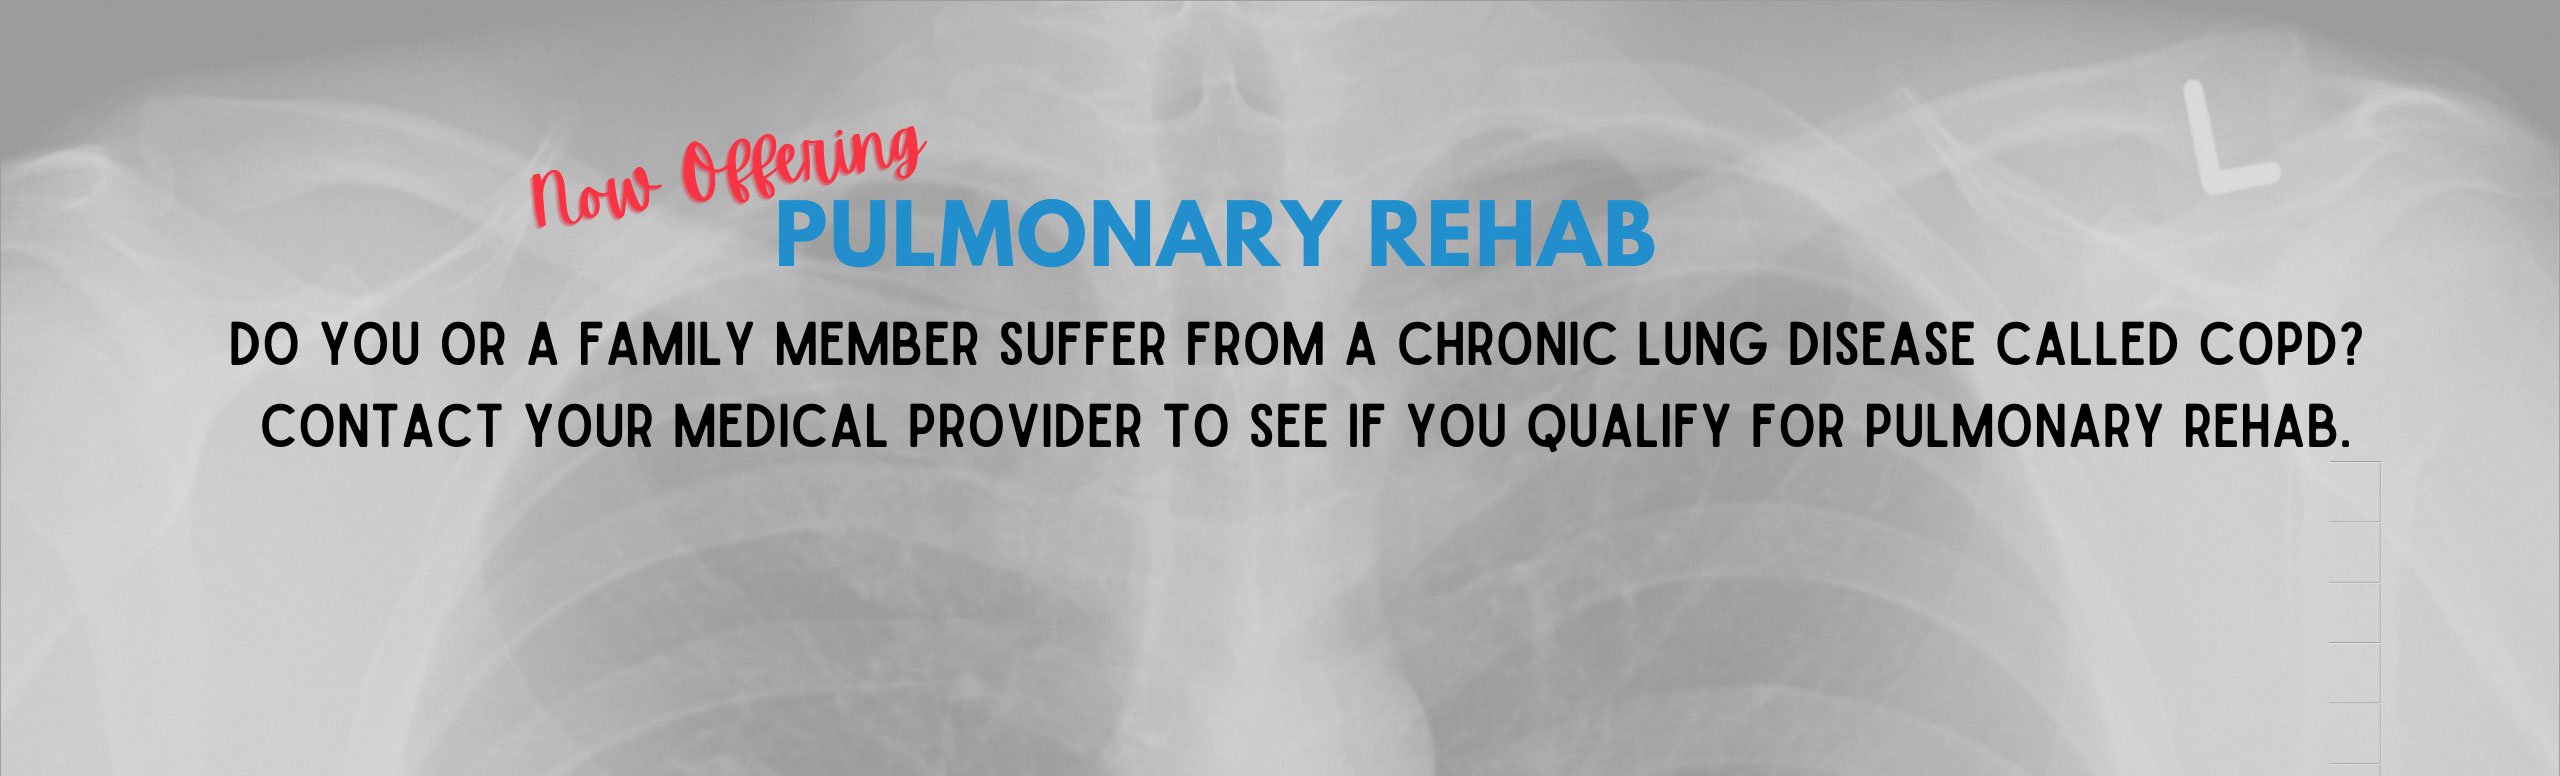 Now Offering Pulmonary Rehab

Do you or a family member suffer from a chronic lung disease called COPD? Contact your medical provider to see if you qualify for pulmonary rehab.